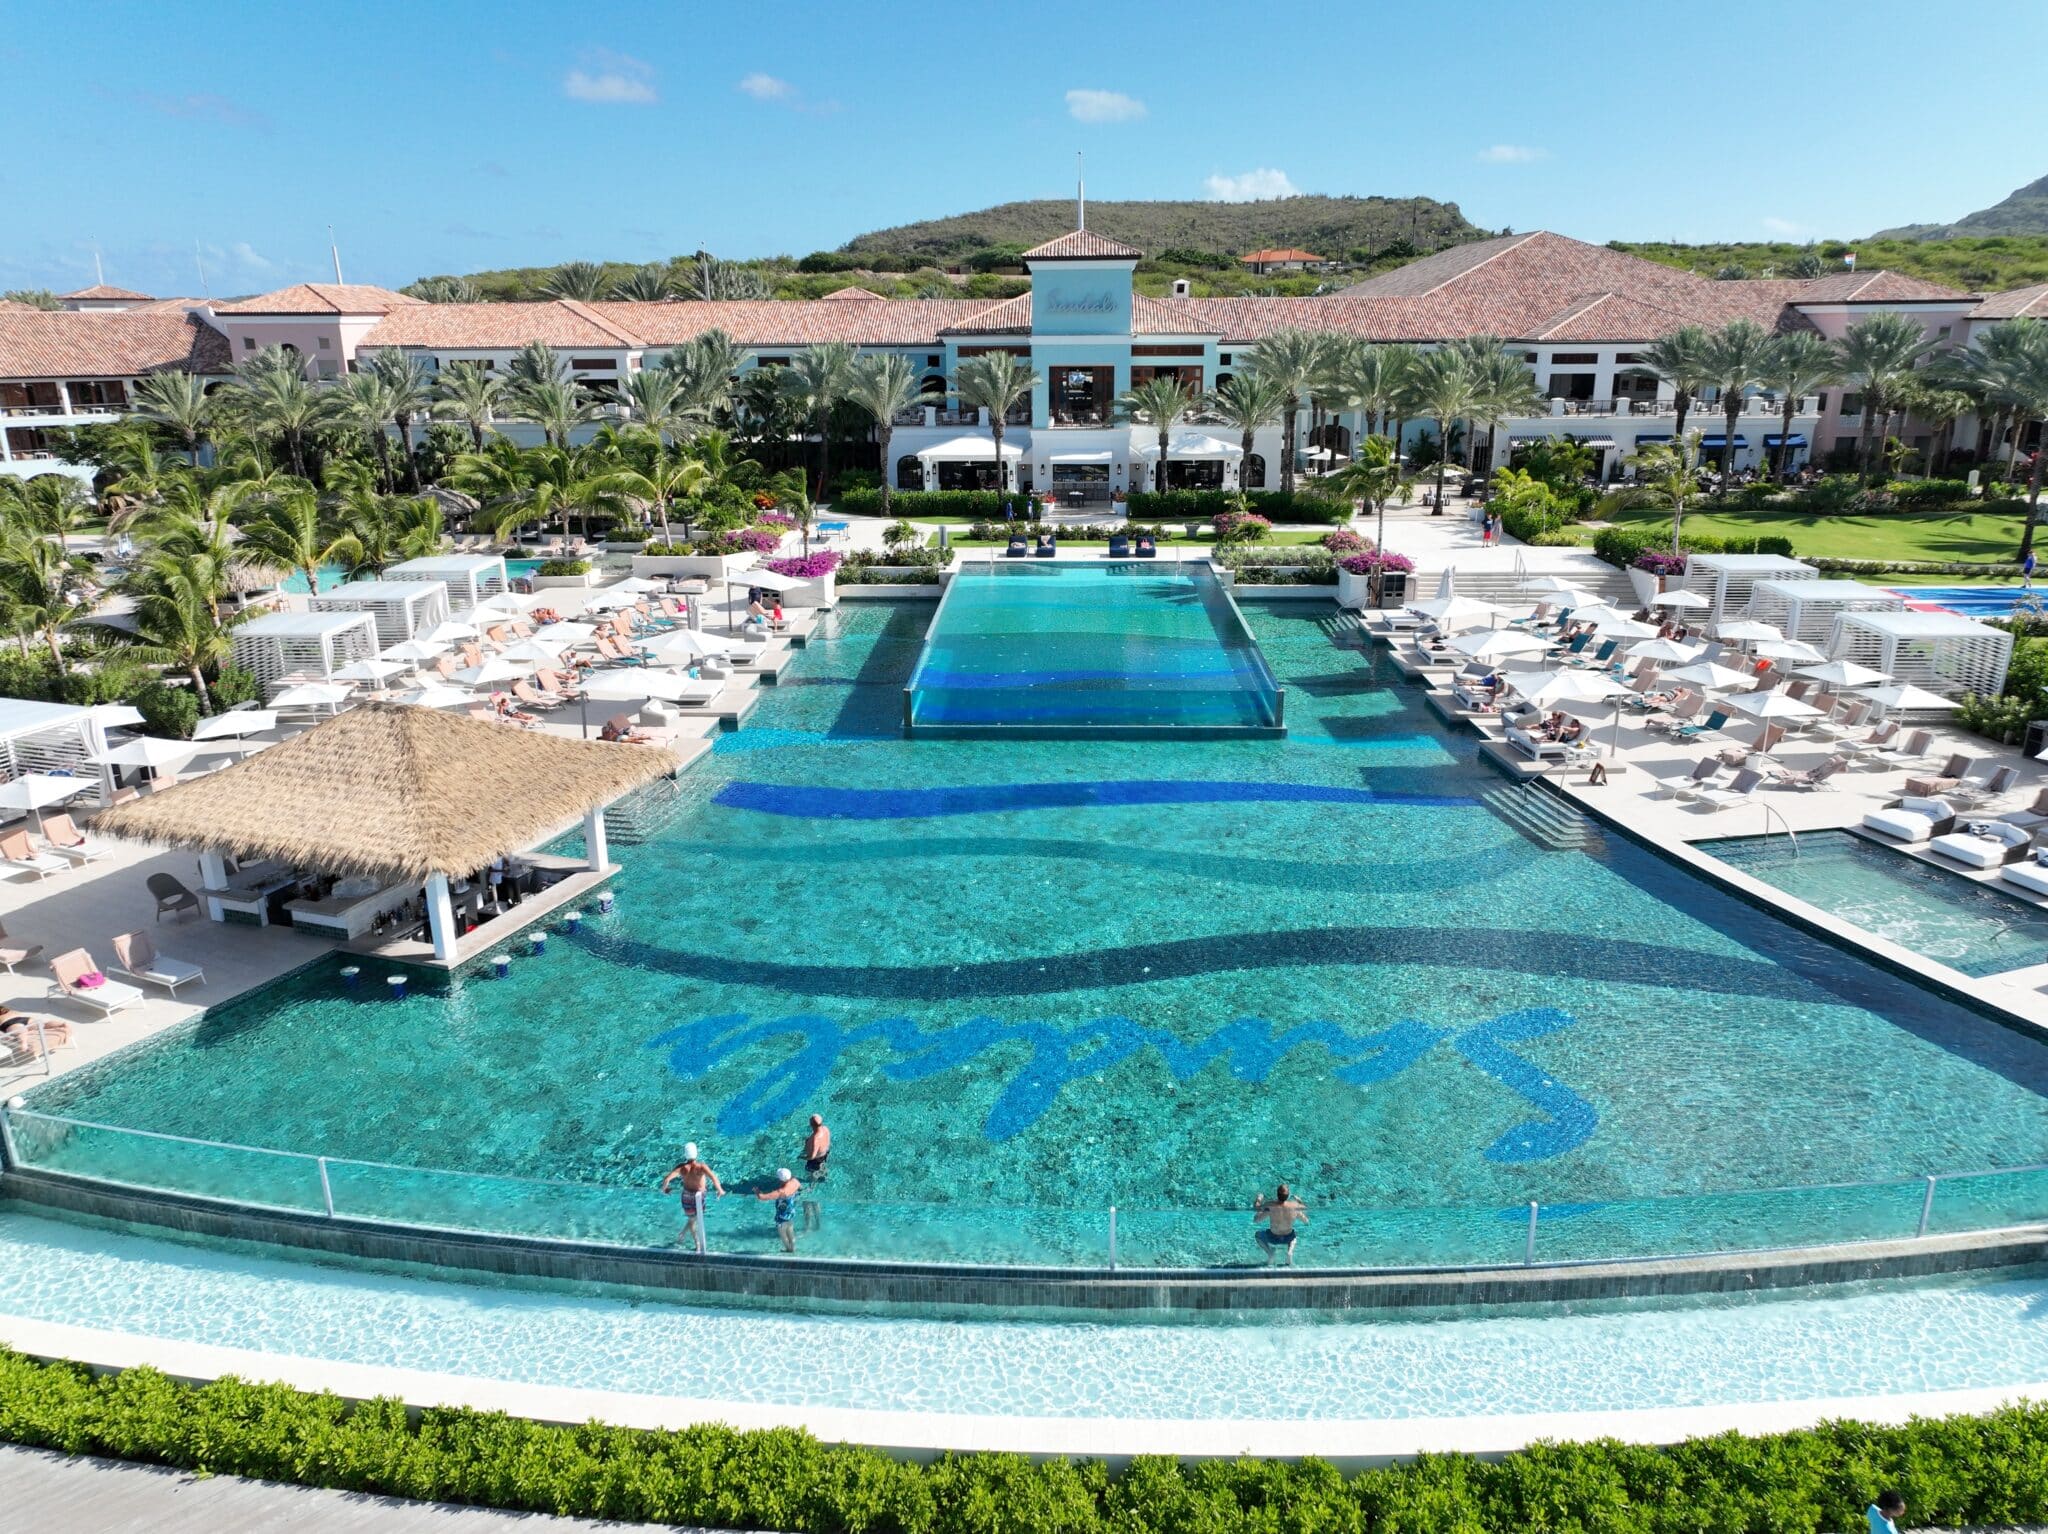 <p>This post is sharing absolutely everything you need to know about the new Sandals Curaçao and whether we recommend staying here. I’ll be covering everything in this post… the good the bad, and the downright ugly.</p> <p><strong>Read more: <a href="https://www.have-clothes-will-travel.com/brutally-honest-sandals-curacao-review/" rel="noreferrer noopener">My Brutally Honest Sandals Curaçao Review: MUST-READ Before Staying Here</a></strong></p>